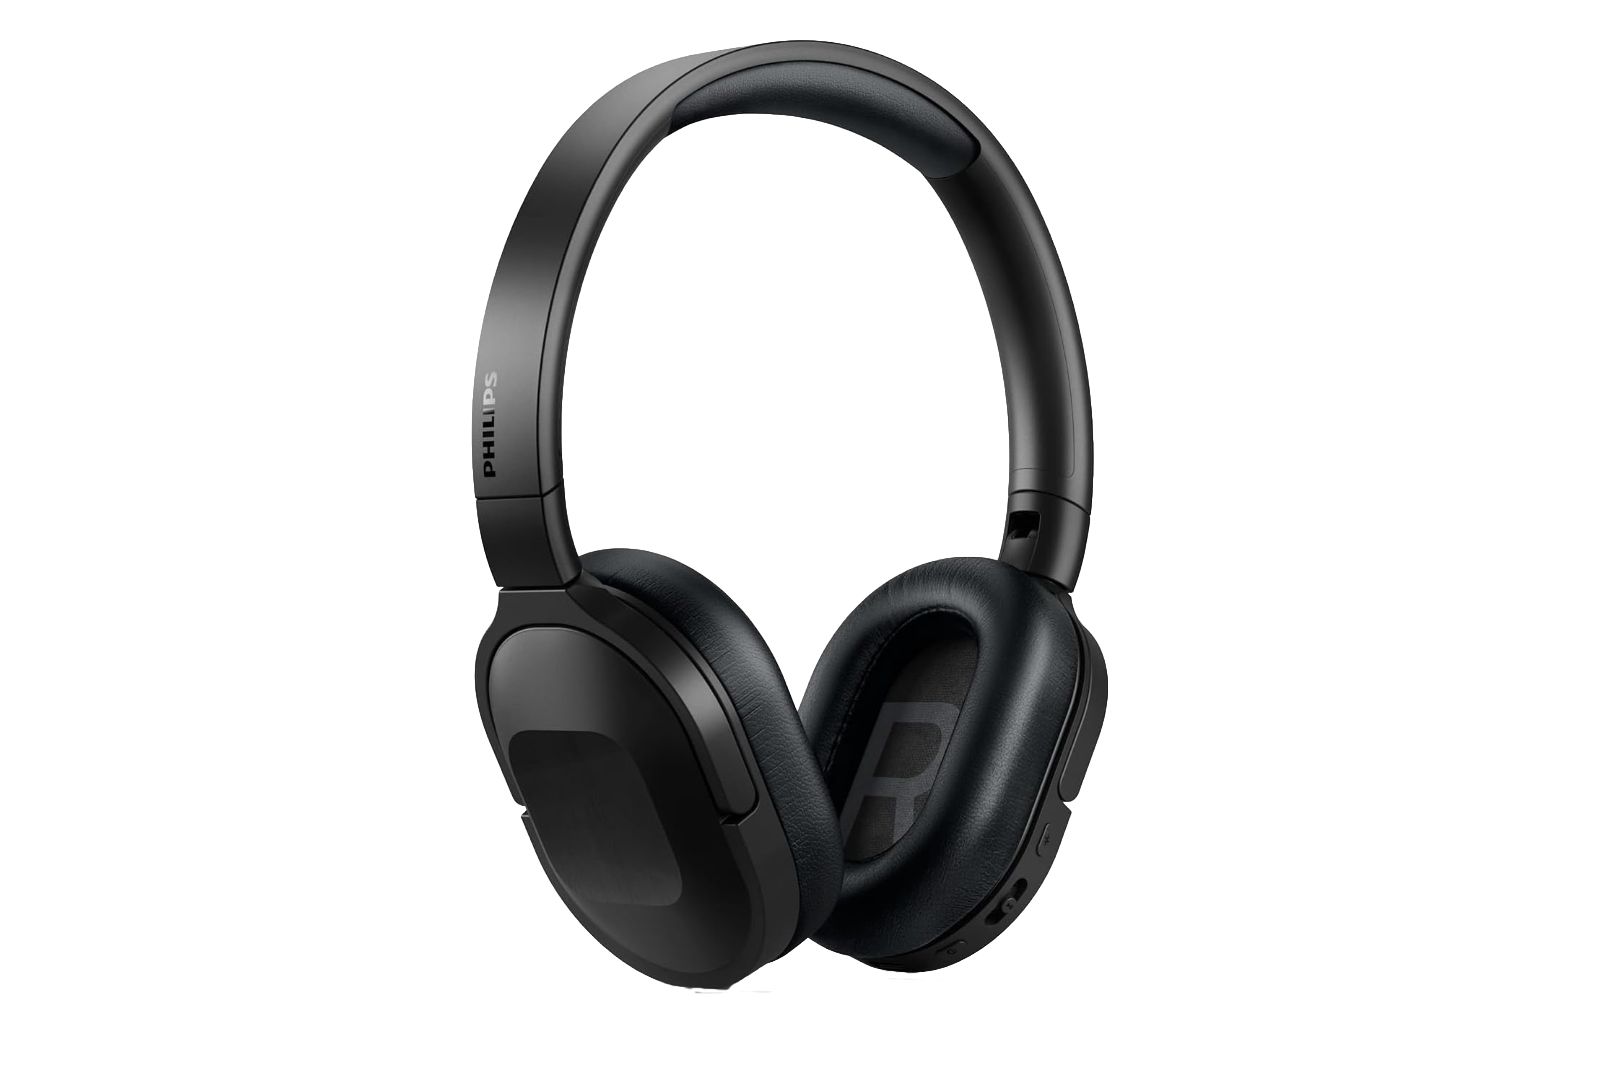 Black headphones with ear cups shaped like rounded rectangles and 